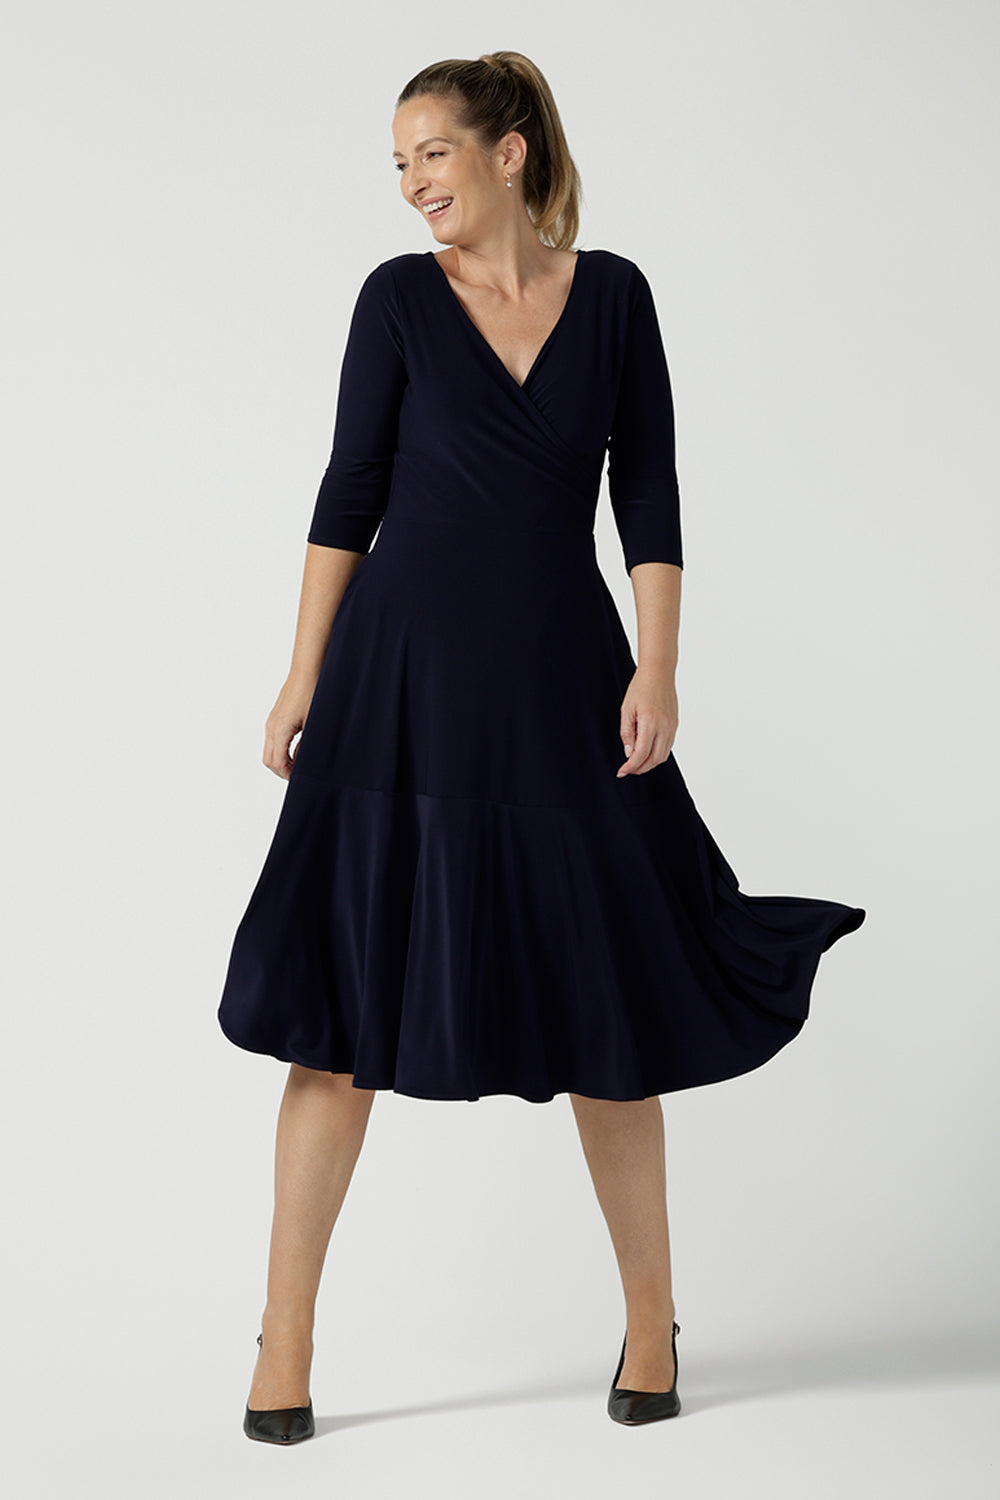 A petite-height, 3/4 sleeve reversible wrap dress in navy jersey worn with a V neck. Made in Australia by Australian and New Zealand women's clothing label, L&F and available in sizes 8 to 24.